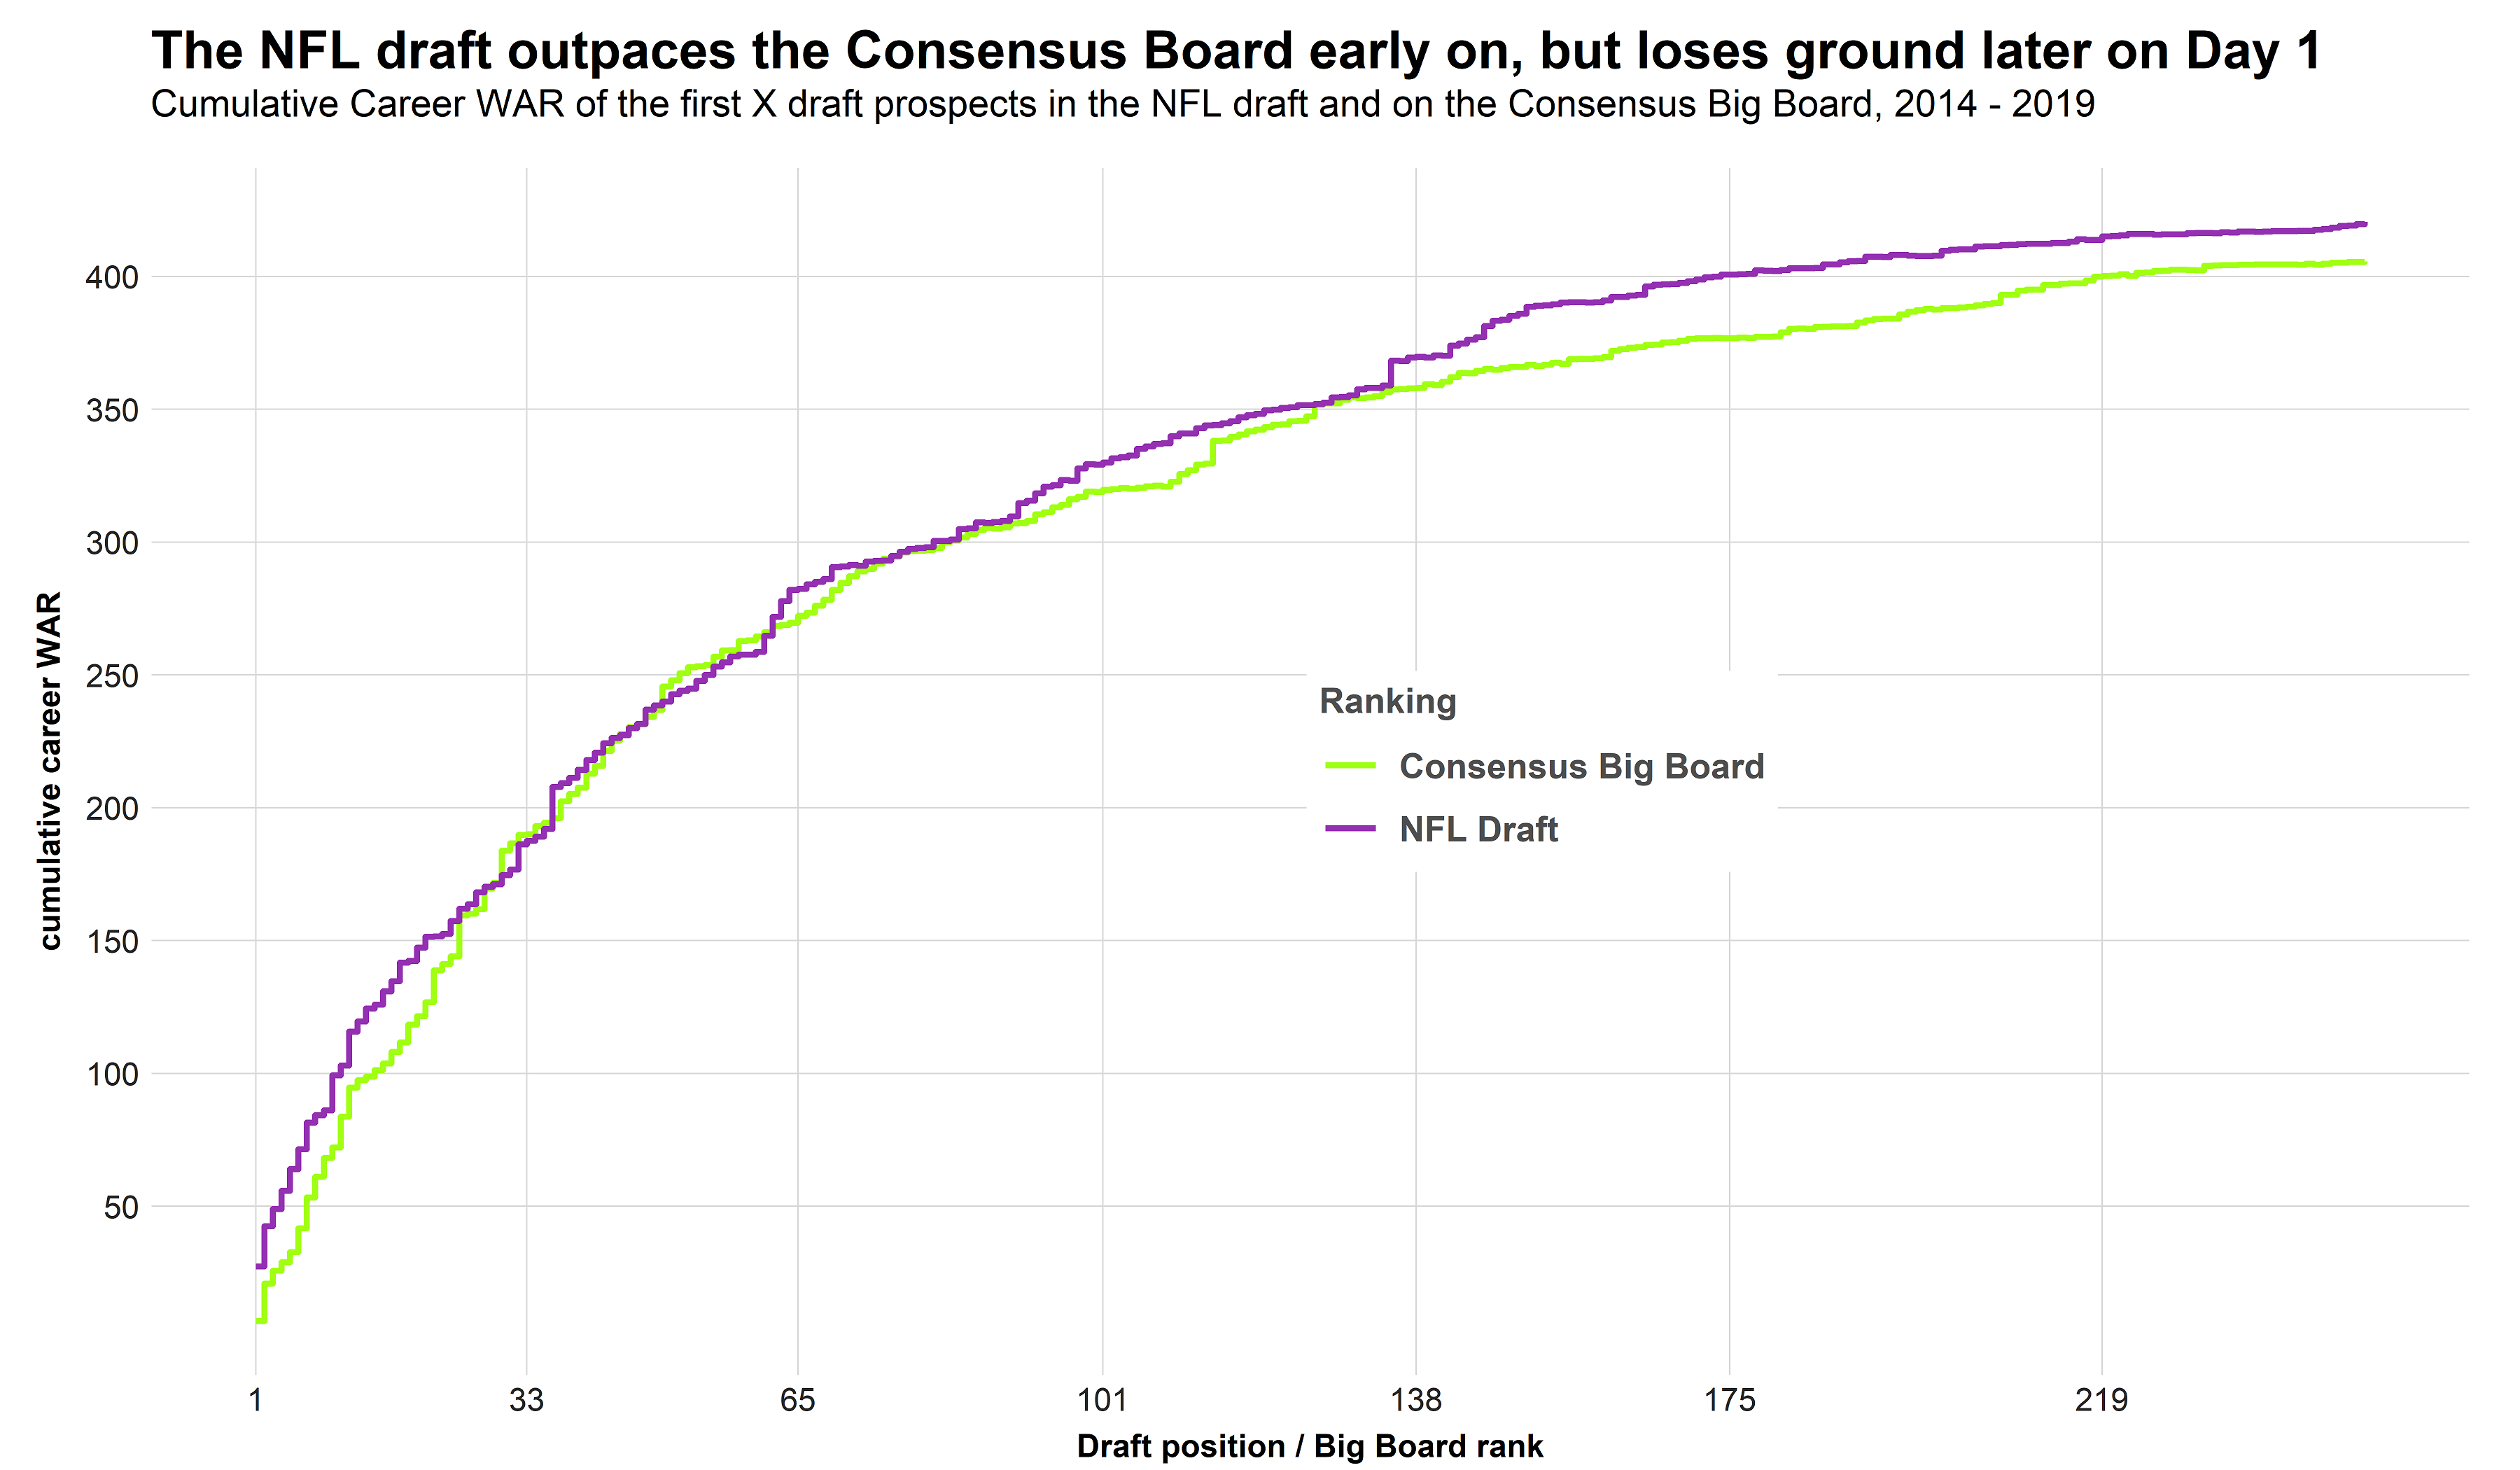 PFF Data Study: Can the Consensus Big Board really predict the